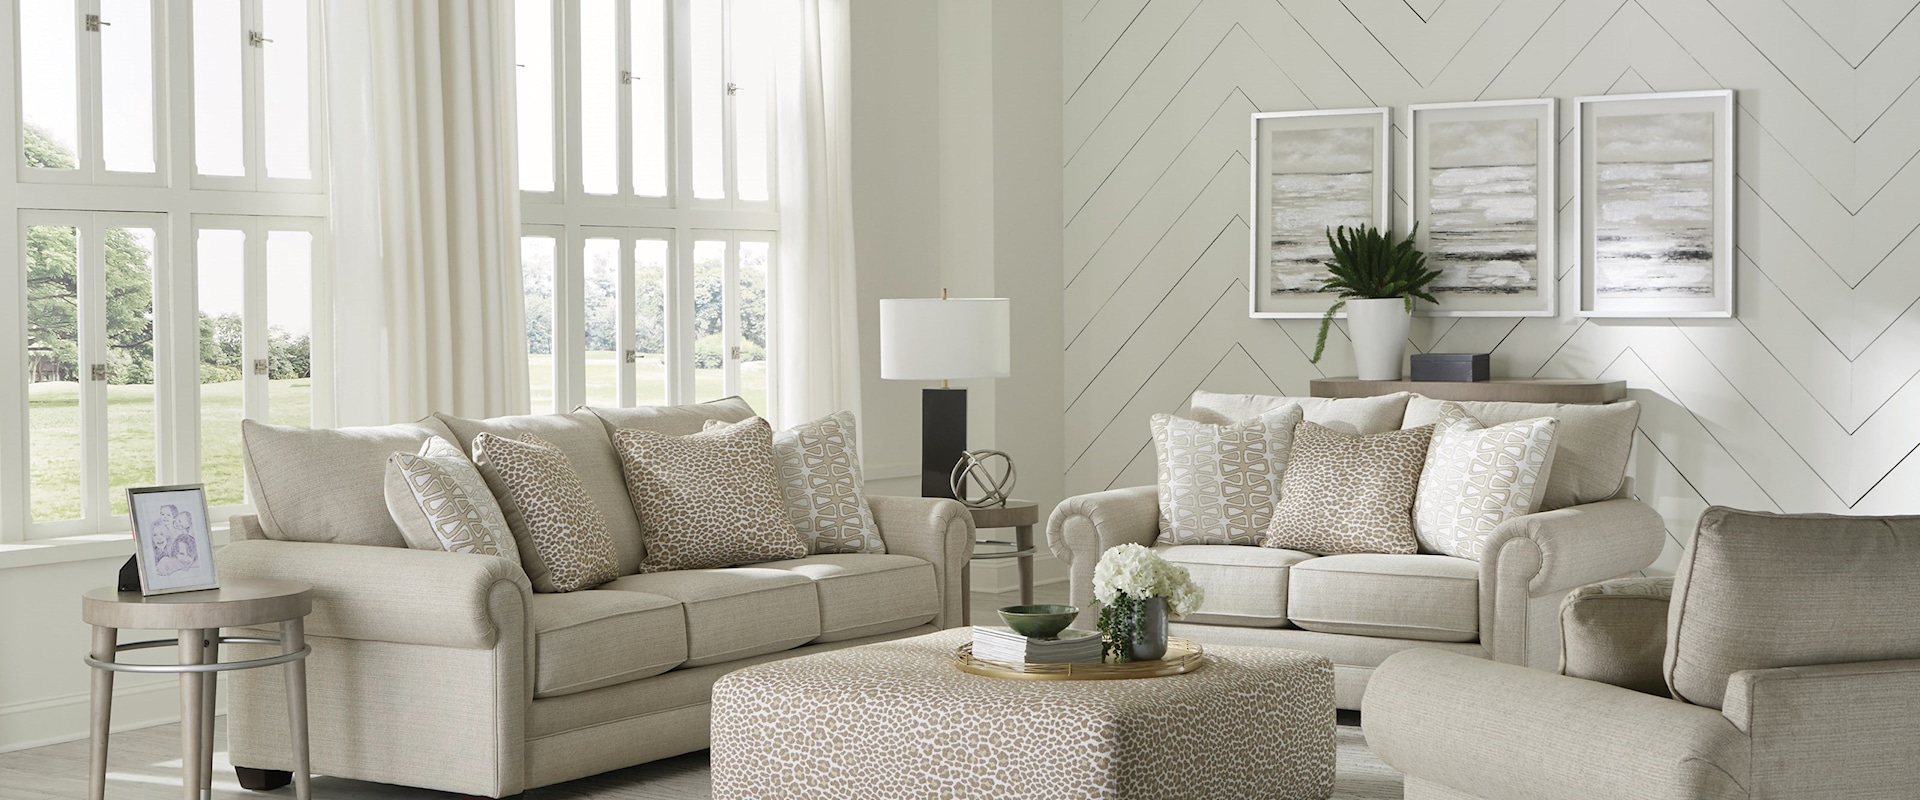 Transitional 4-Piece Living Room Set with Rolled Arms and Ottoman